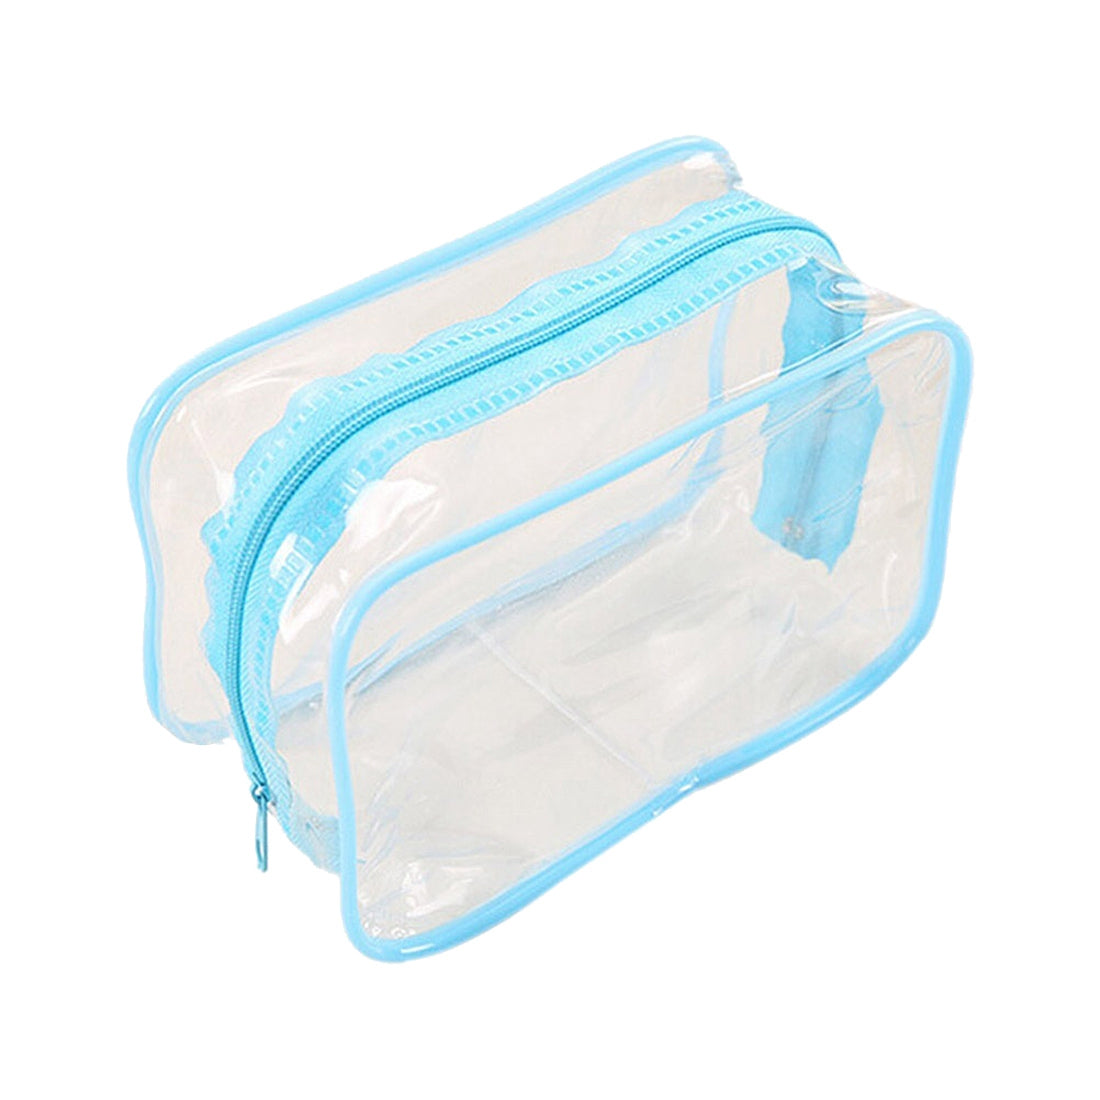 Hot PVC Clear Pouch Travel Bathing Toiletry Zipper Cosmetic Bag, Blue S - ebowsos